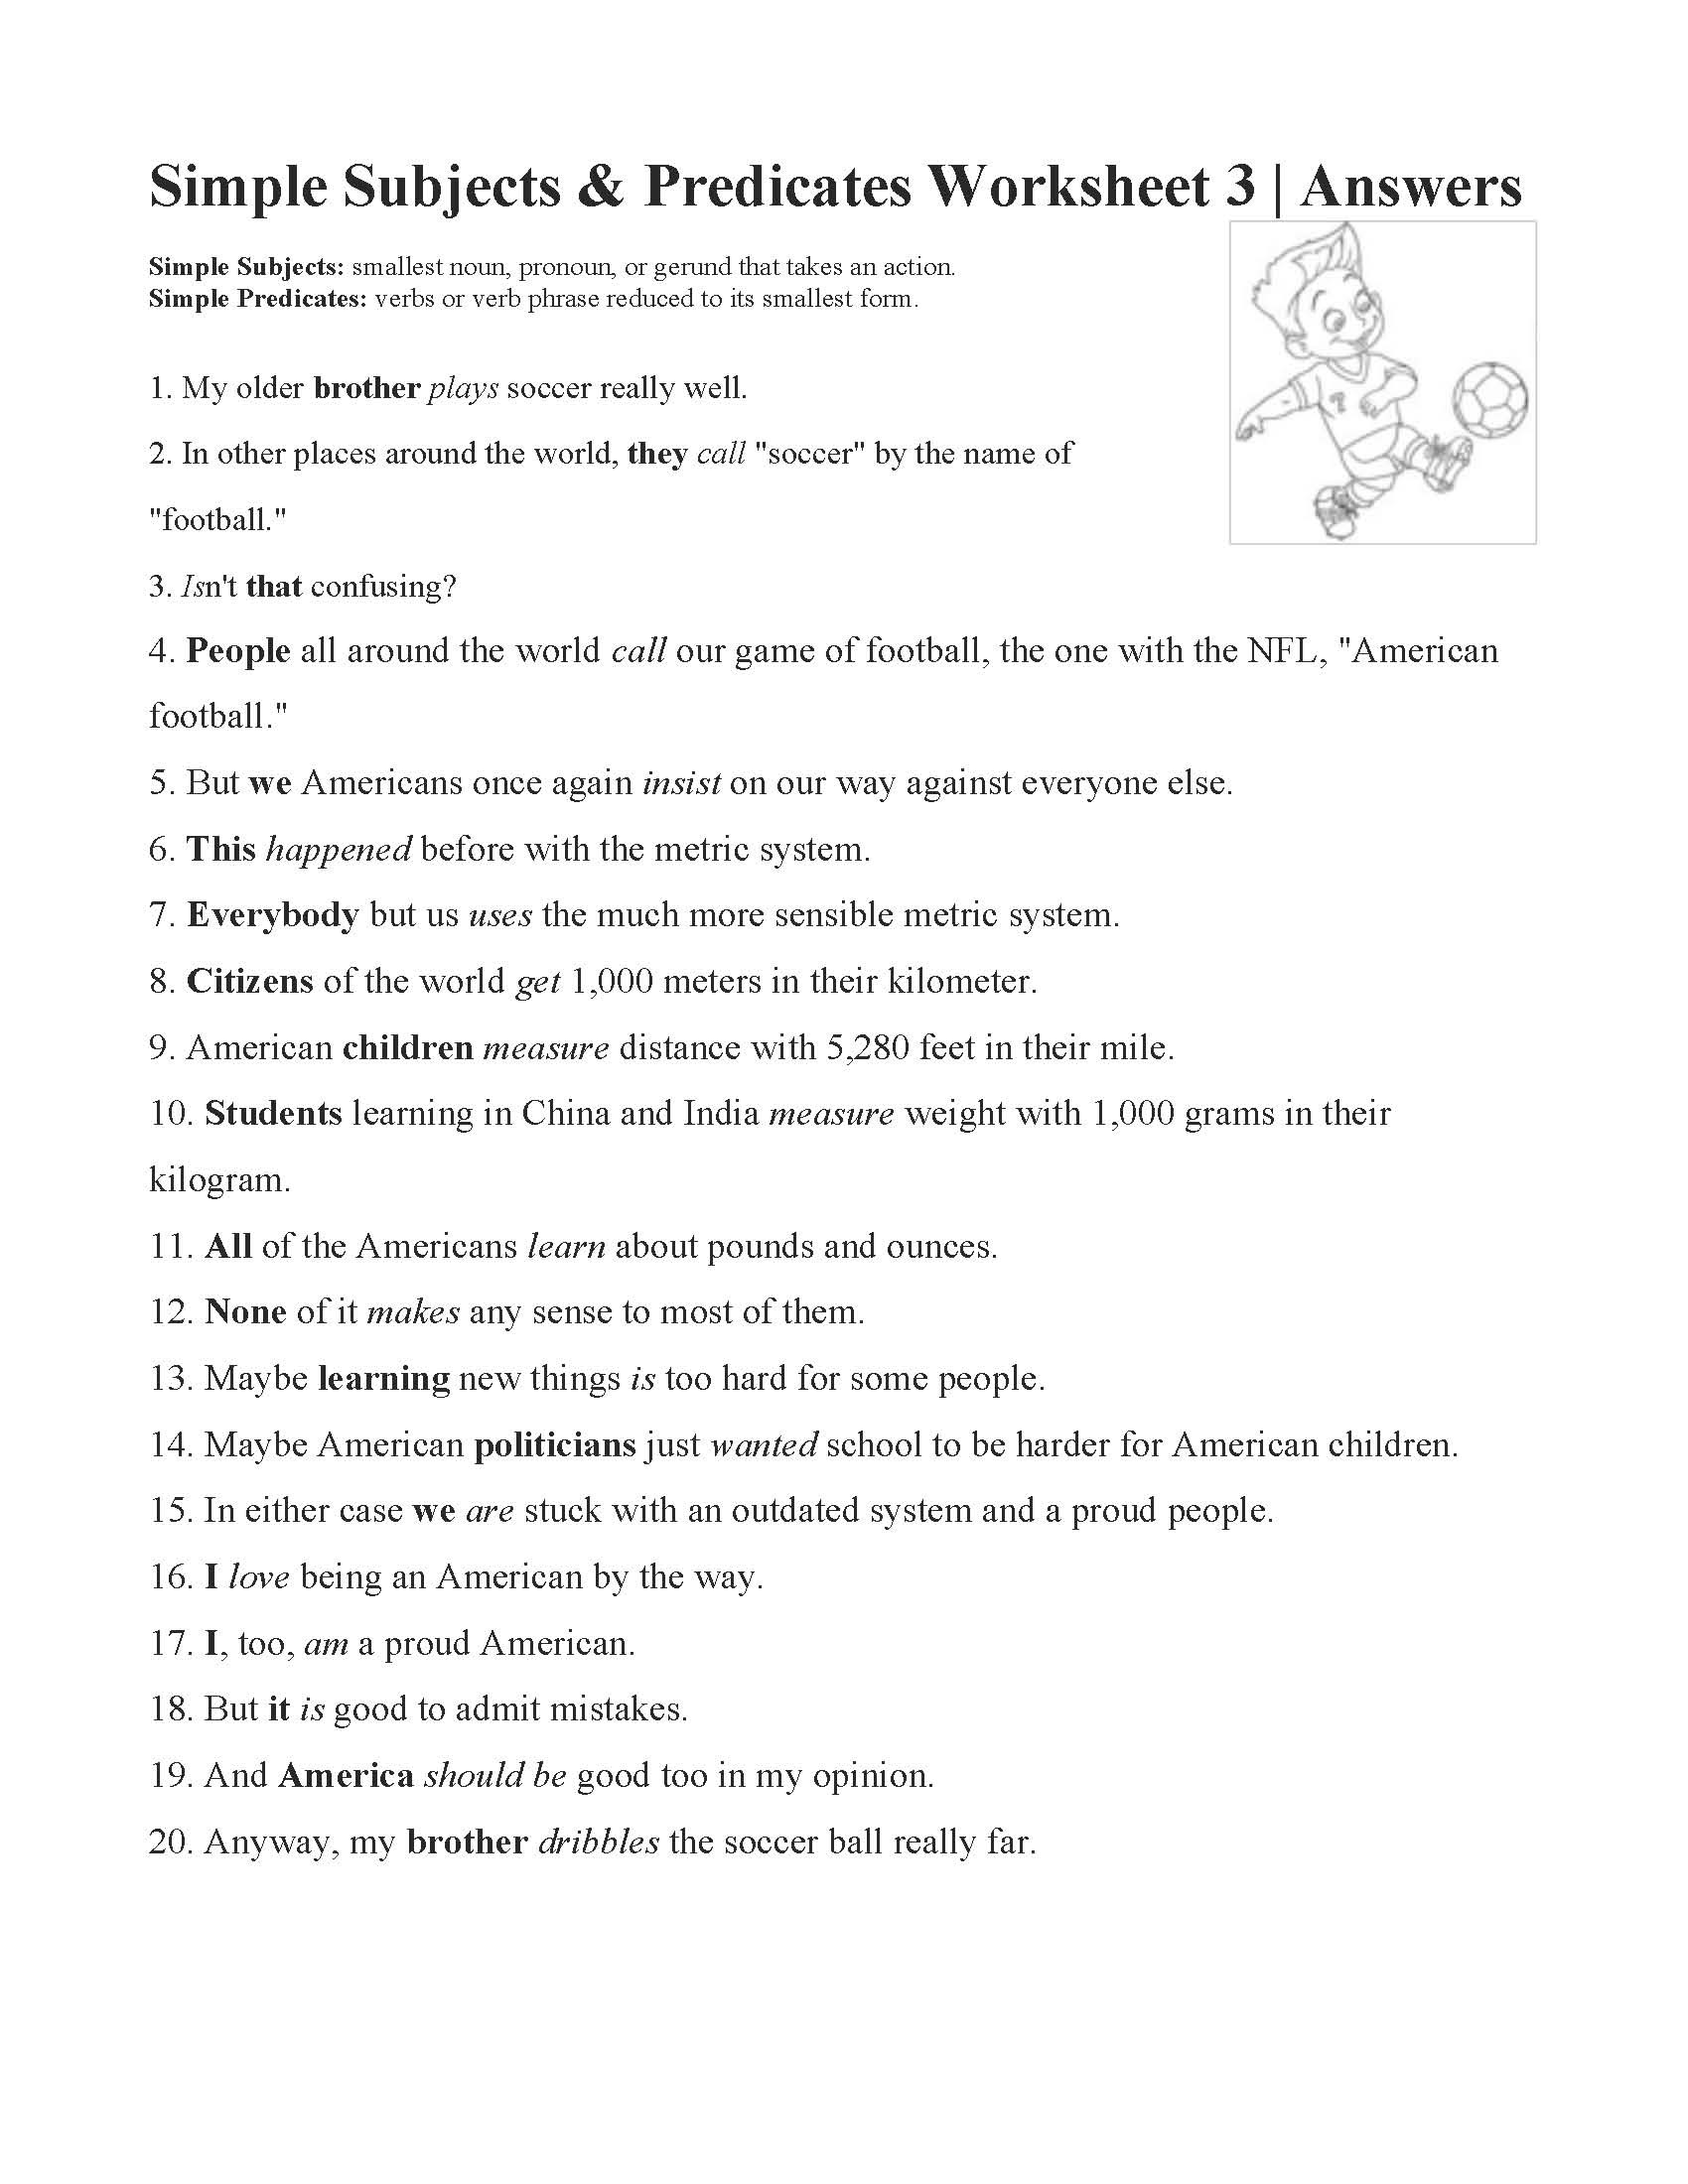 Subjects and Predicates Worksheet Simple Subjects and Predicates Worksheet 3